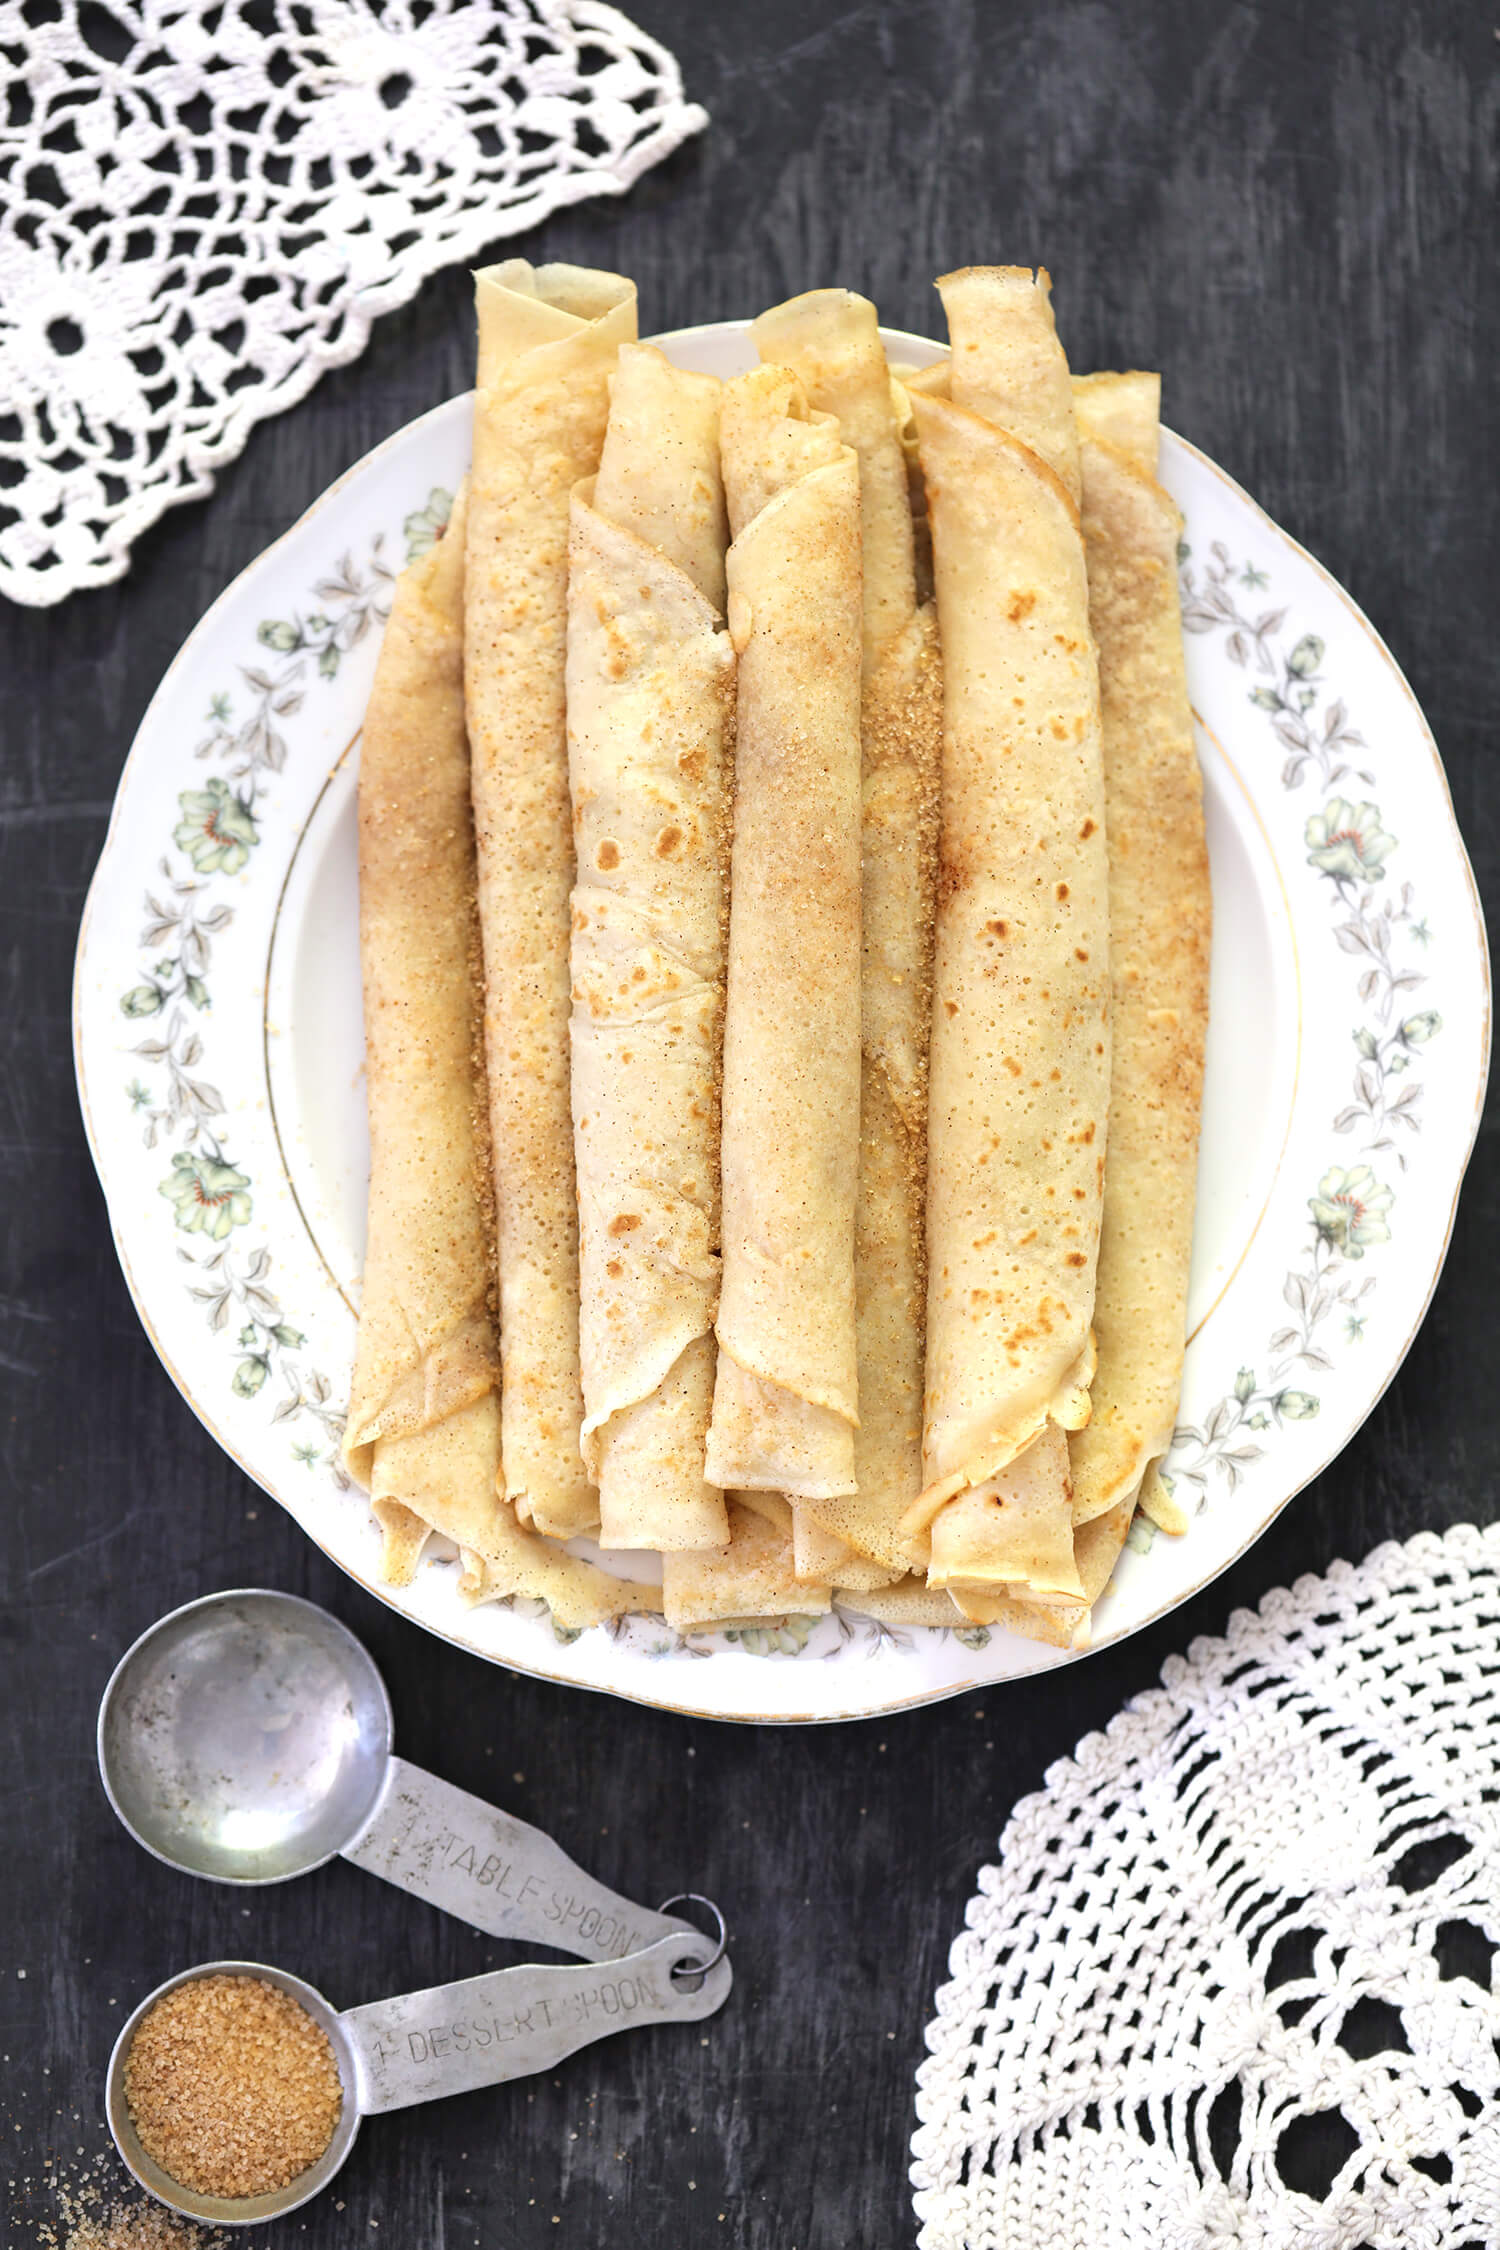 Have you heard of South-African Pannekoek? Check it out!